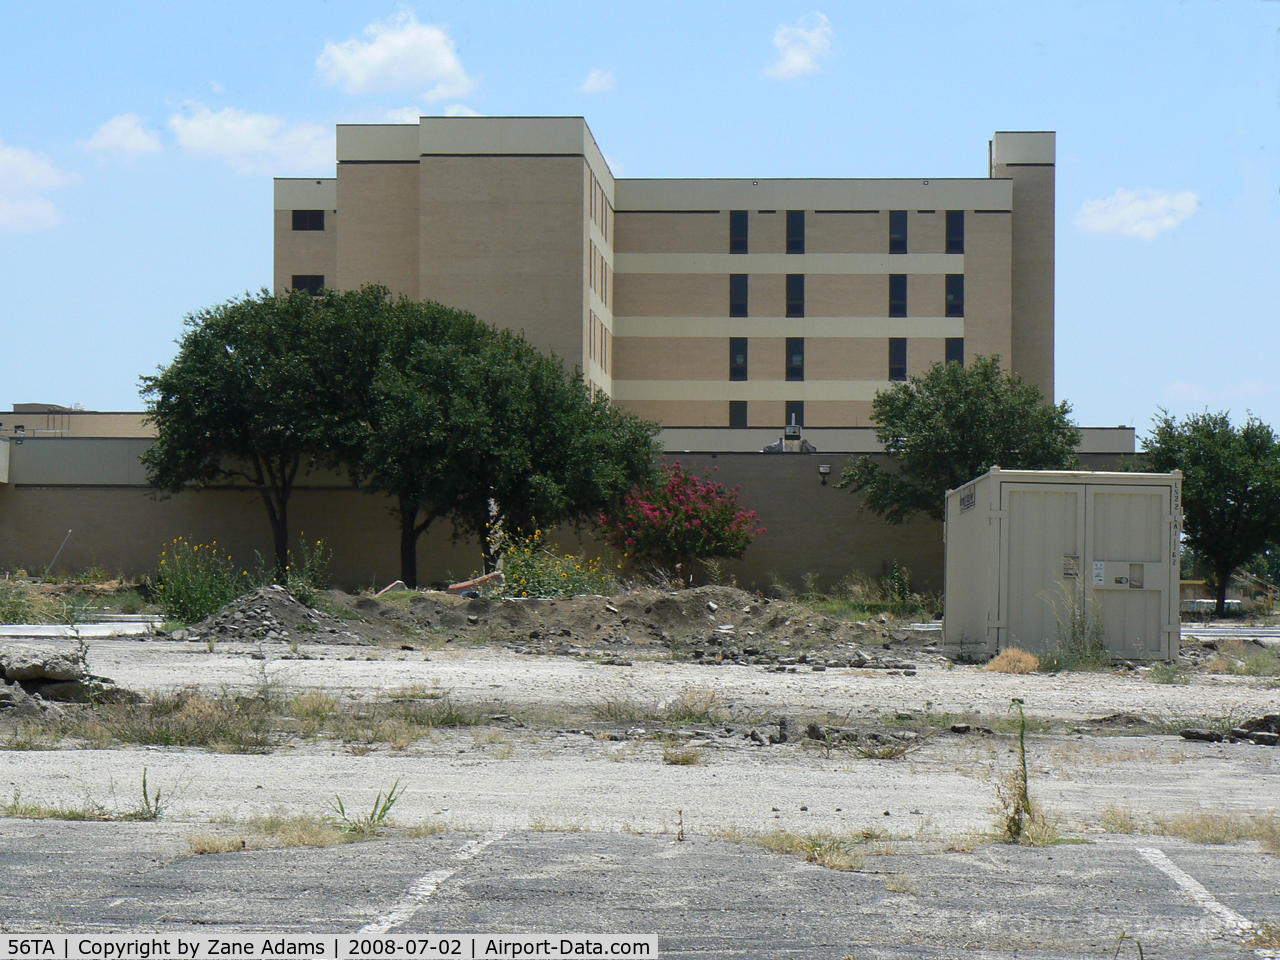 Dallas/fort Worth Medical Center Heliport (56TA) - Dallas/fort Worth Medical Center Heliport - This hospital is closed. The helipad is no longer marked or flagged. 